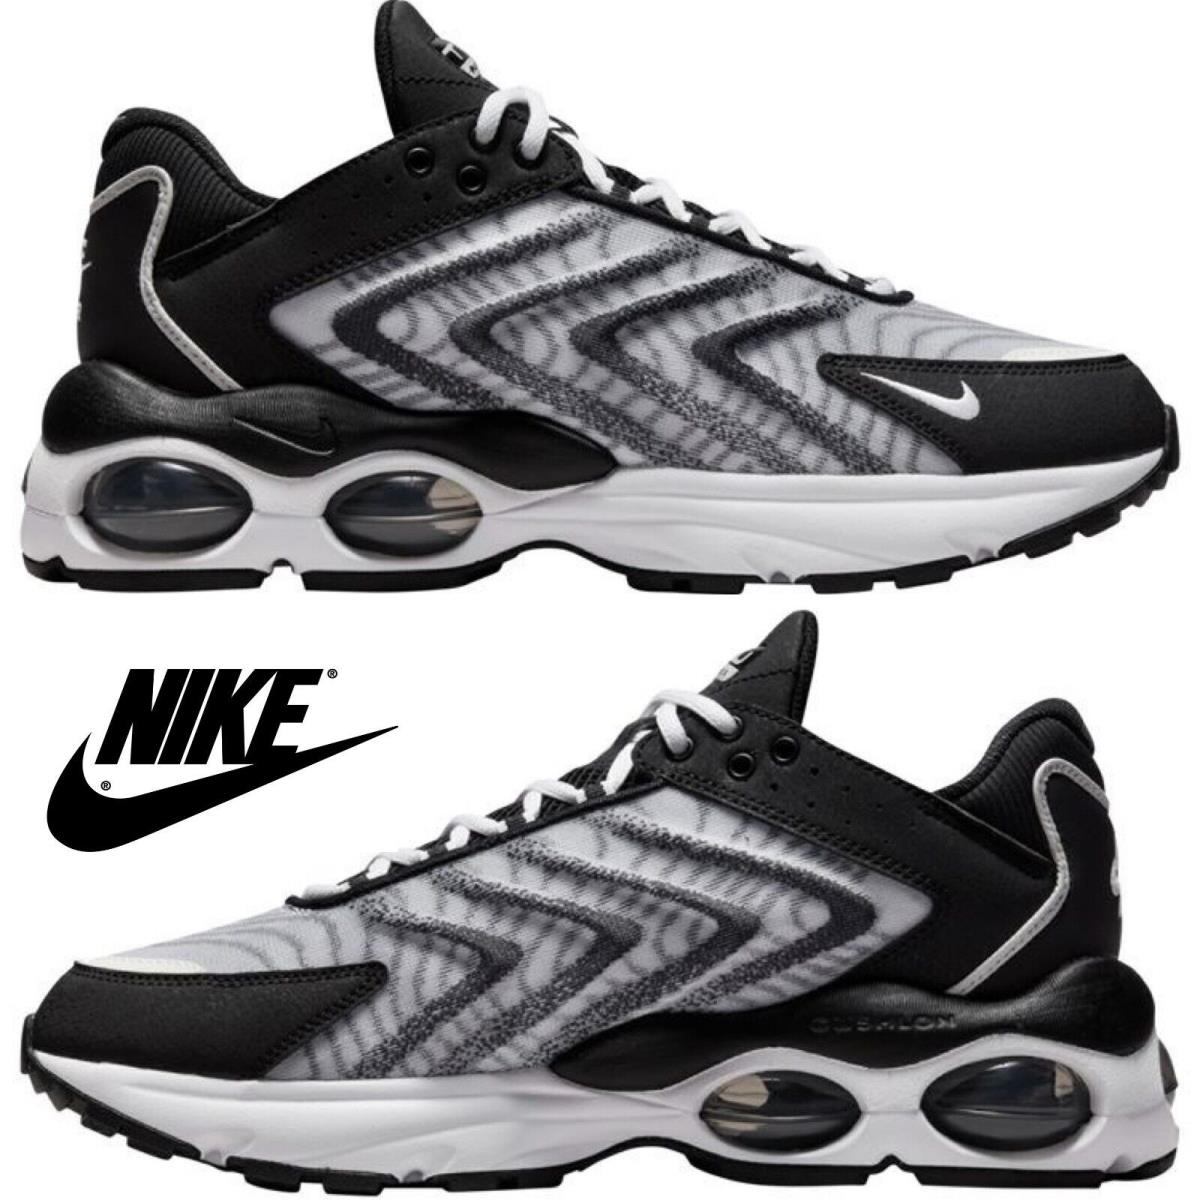 Nike Air Max Tailwind Men`s Shoes Running Sneakers Athletic Sport Casual Comfort - Black , White/Black Maufacturer